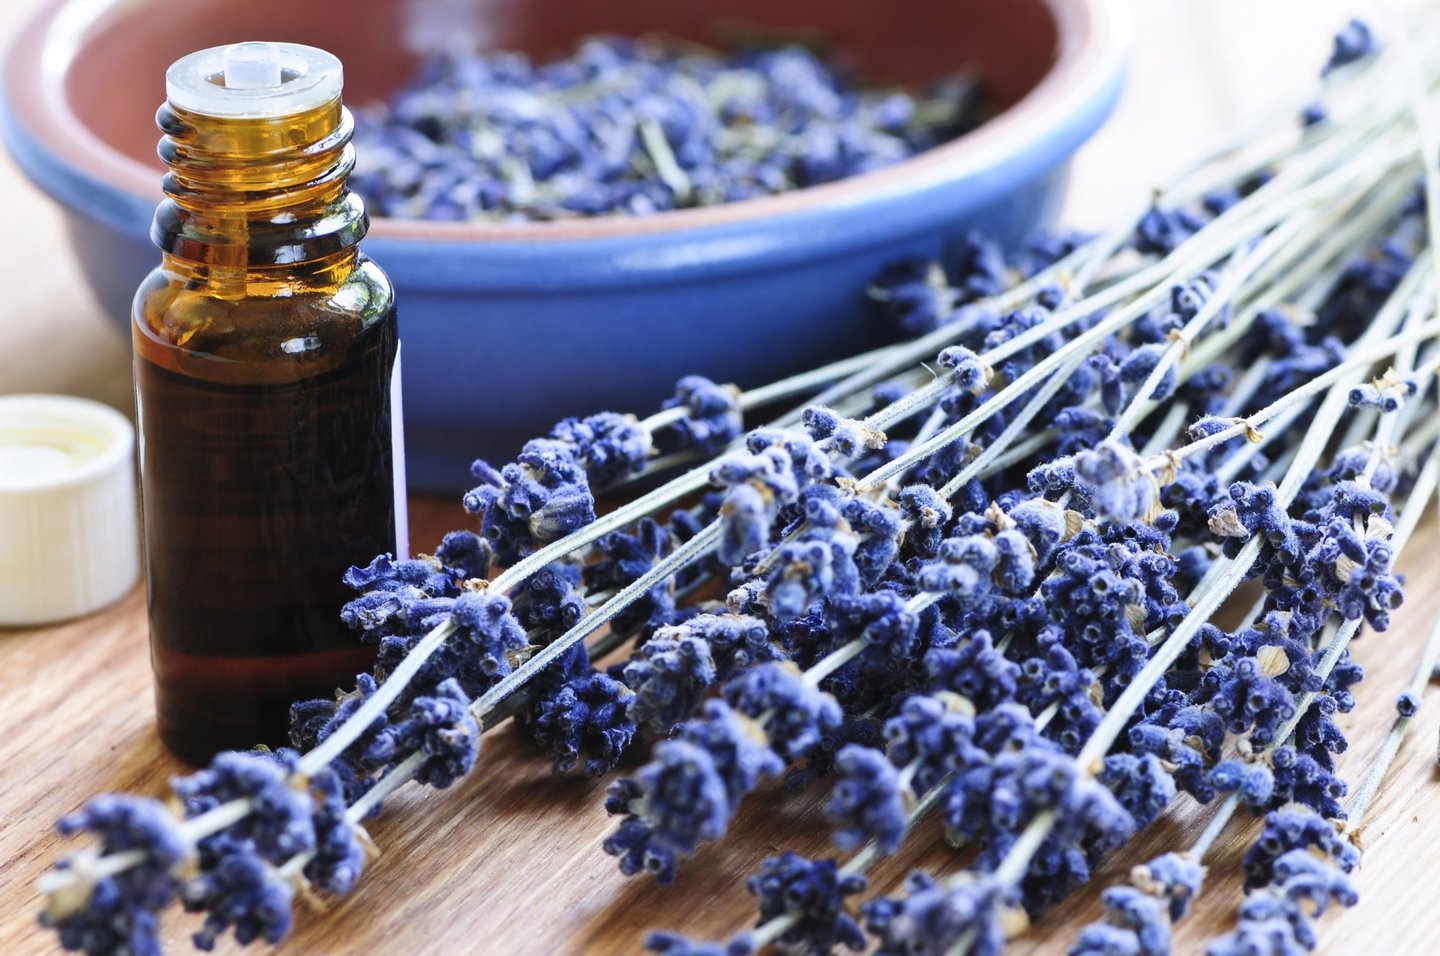 lavender, natural, organic, aroma, therapy, aromatherapy, dry, dried, herb, herbal, beauty, cosmetic, hygiene, plant, scent, scented, spa, wellness, body, care, bodycare, relaxing, relaxation, skincare, aromatic, sprig, sprigs, pampering, wellbeing, oil, essential, bottle, essence, perfume, 